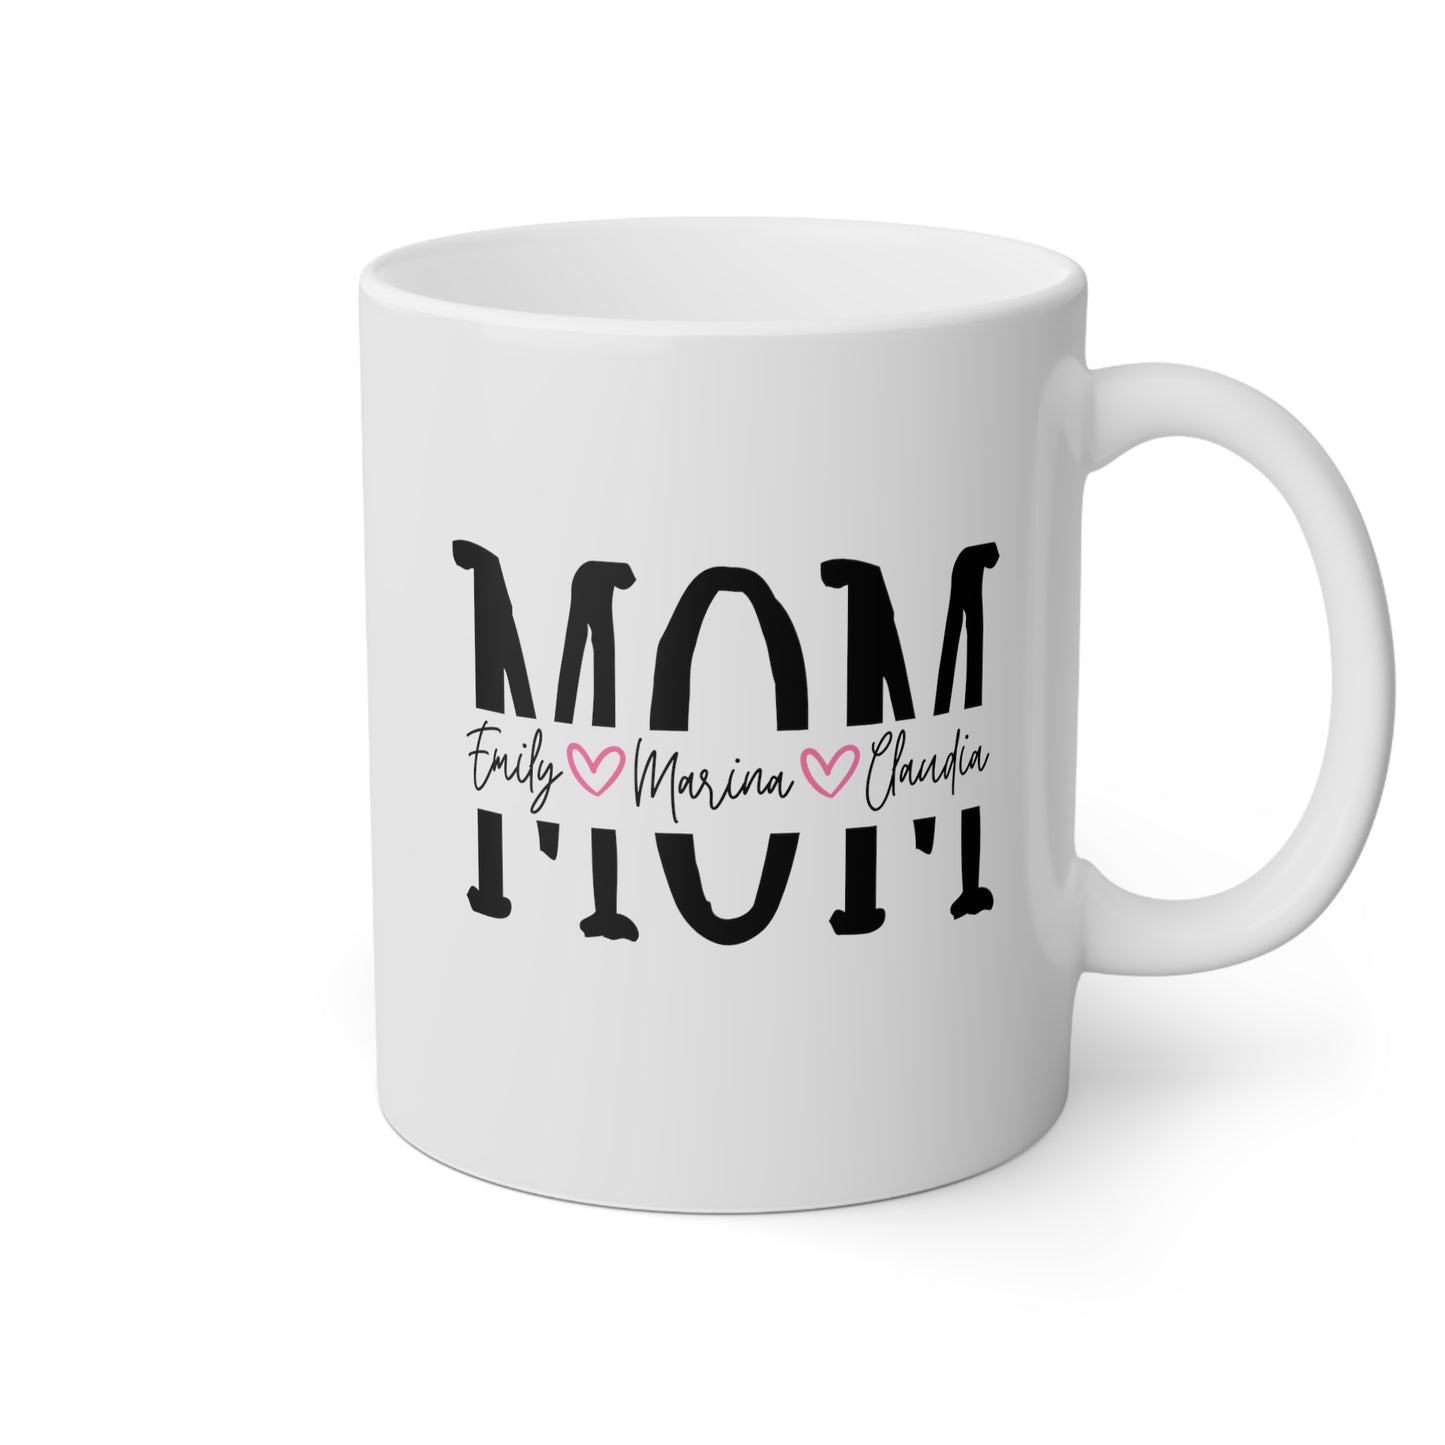 Mom With Kids' Names 11oz white funny large coffee mug gift for mother's day son daughter heart personalize custom waveywares wavey wares wavywares wavy wares